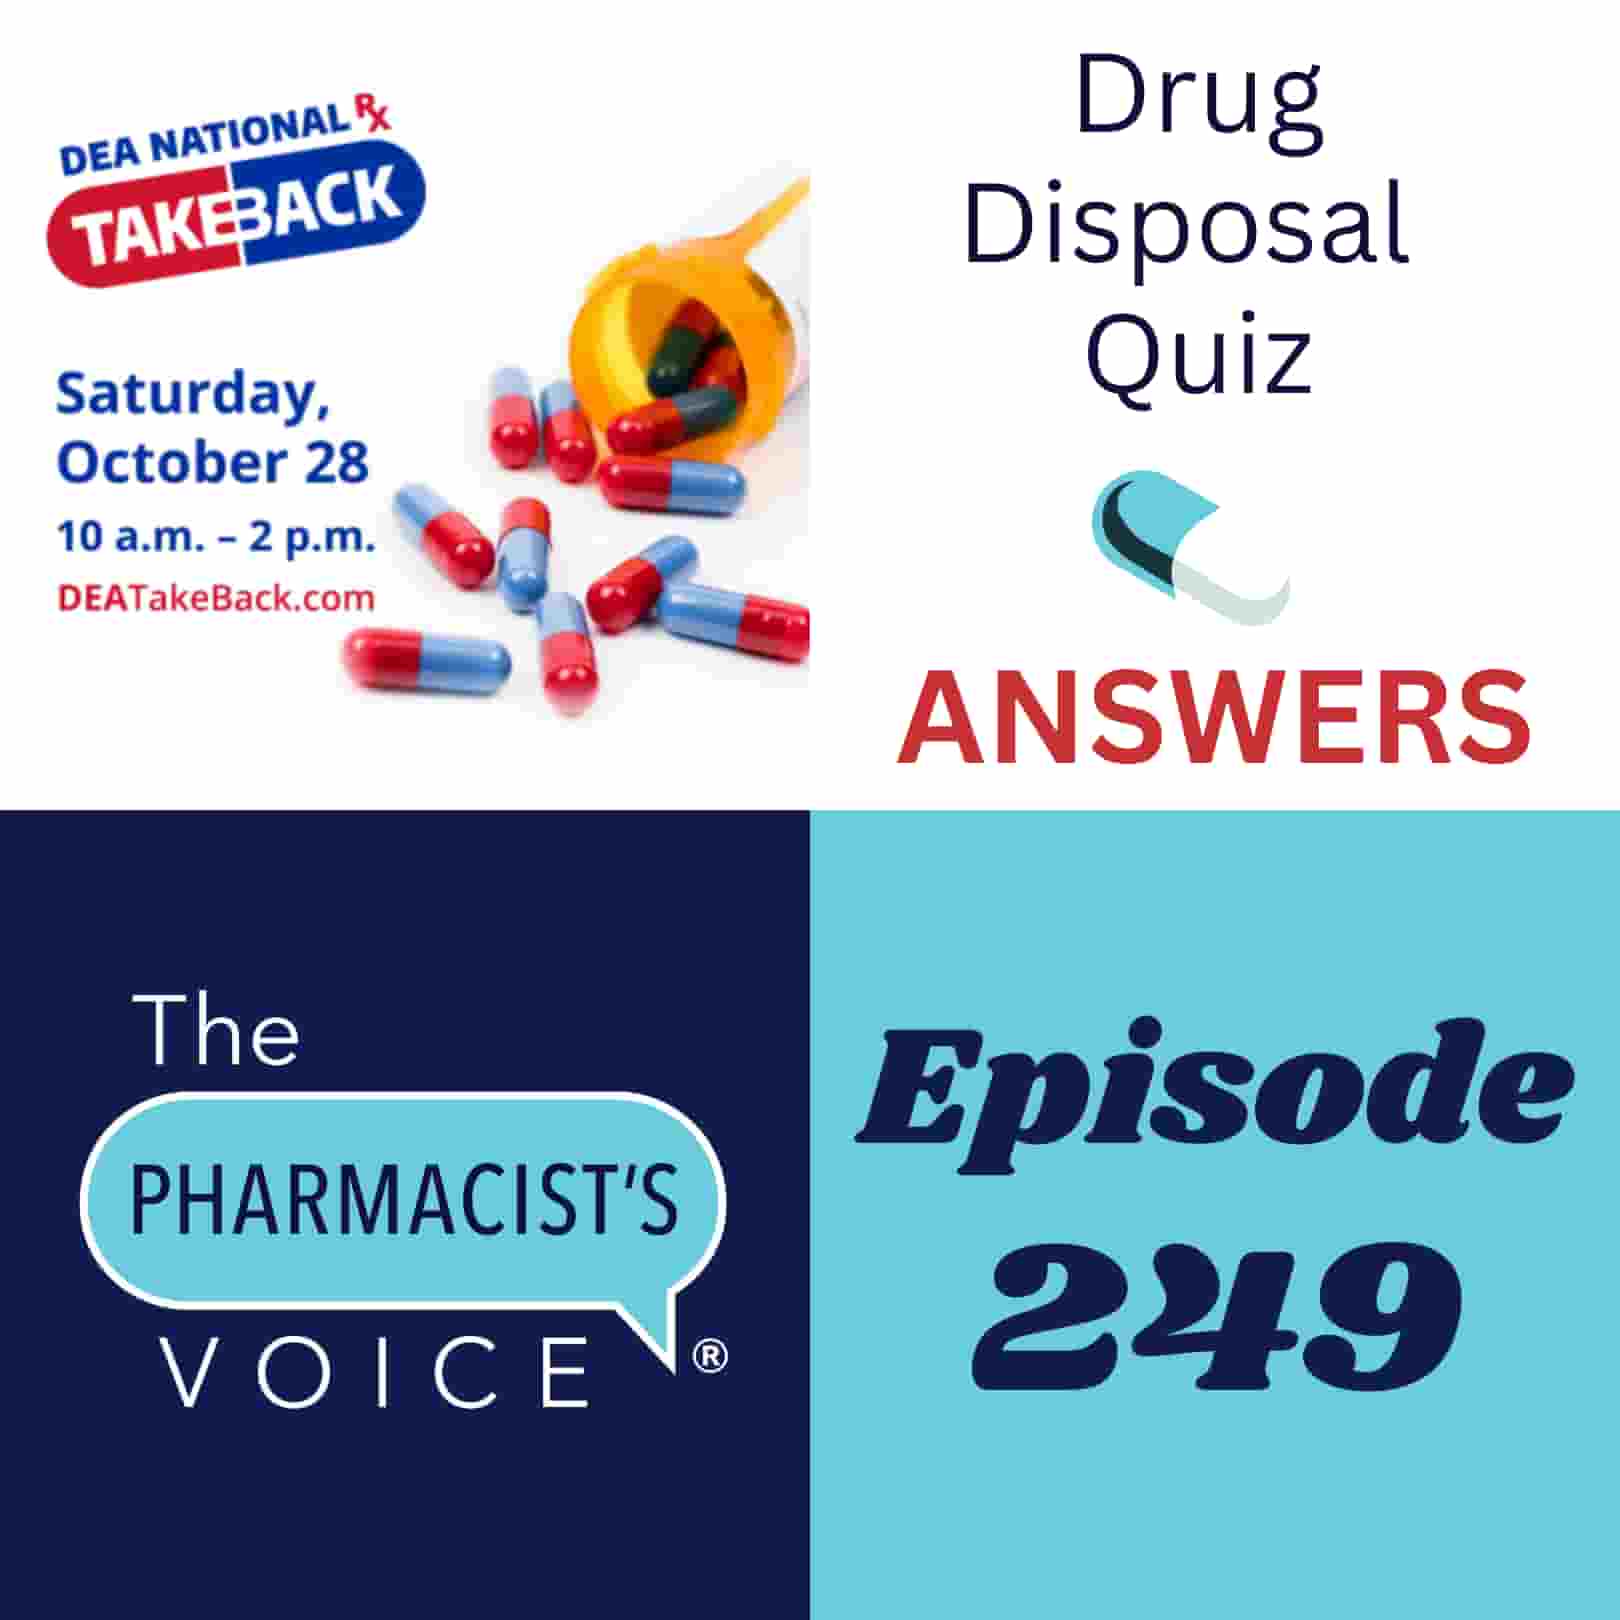 The Pharmacist's Voice Podcast Episode 249. Drug Disposal Quiz ANSWERS.